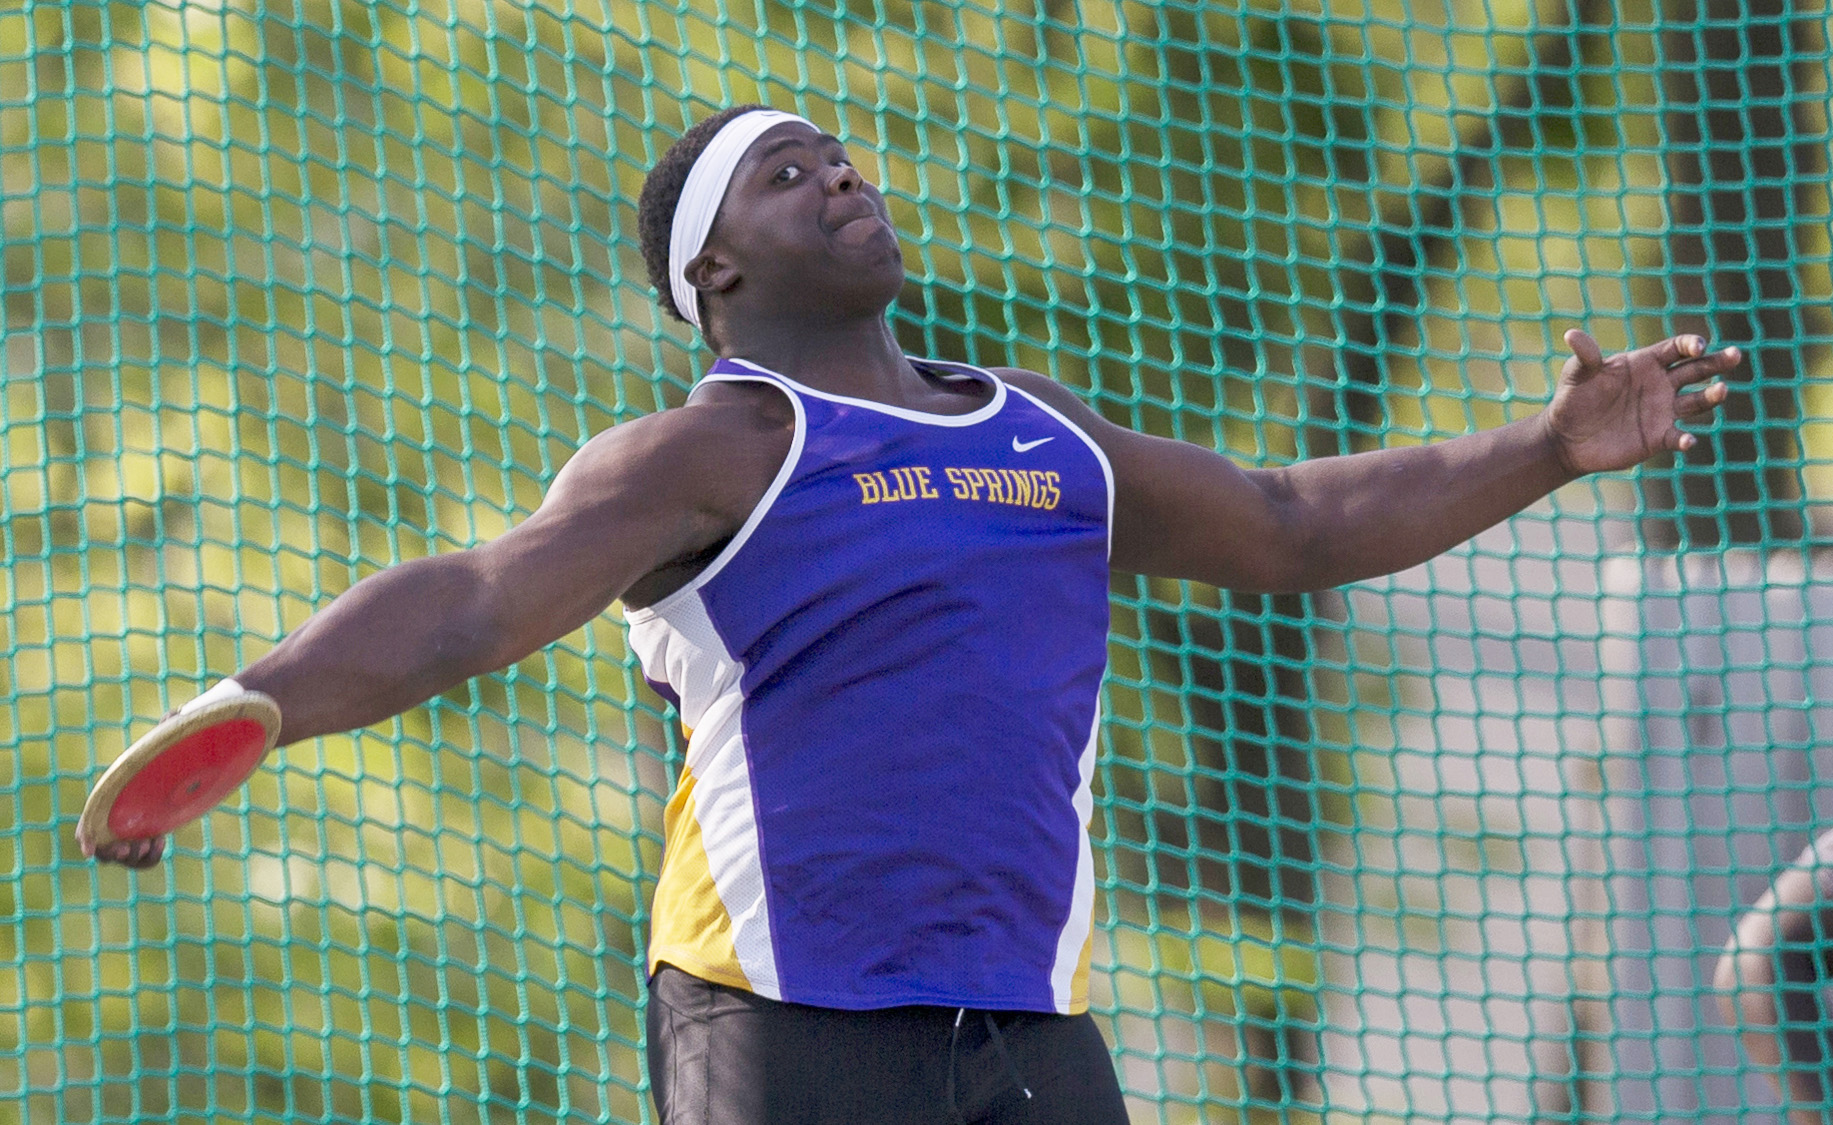 Blue Springs senior Carlos Davis unleashes a throw of 214 feet, 4 inches on his first attempt in the discus in the Gary Parker Invitational Thursday at Blue Springs High School. Davis' toss was the best high school throw in the nation this season as the Wildcats claimed the team title. Brian Davidson | Special to The Examiner